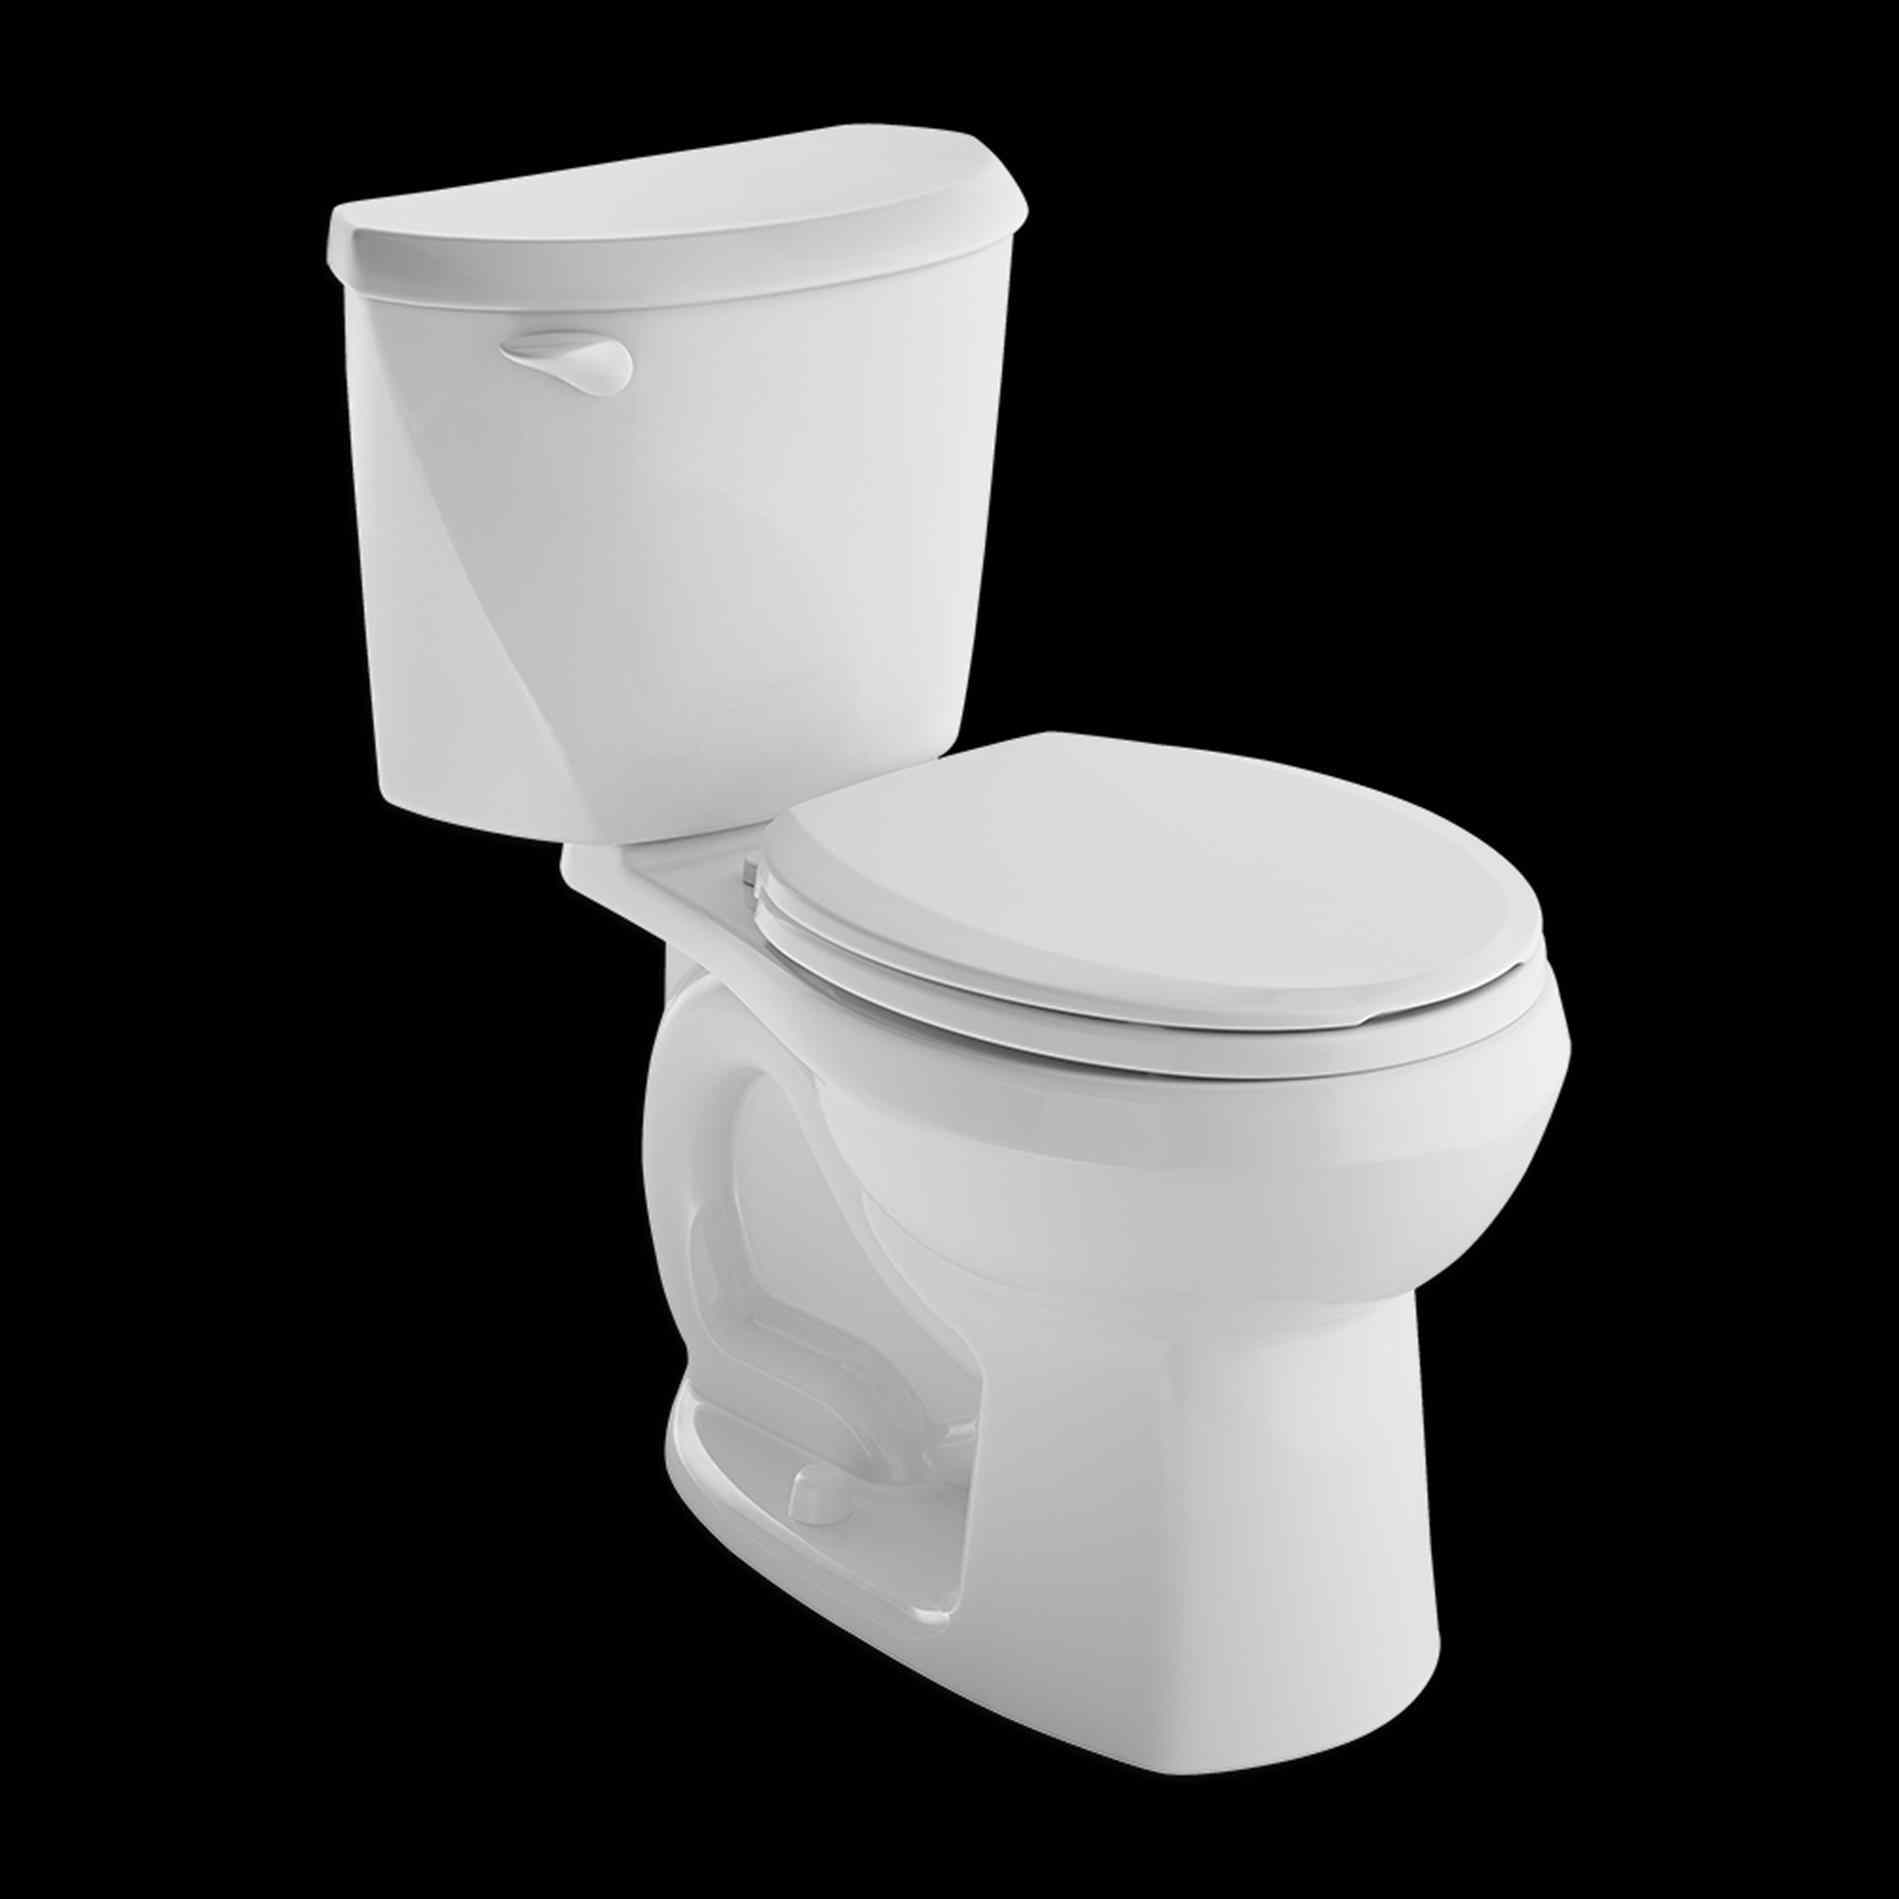 Commode Toilet Png Awards Reliant Round Front Gpf American Standard Reliant Commode Toilet Png Round Front - Toilet, Transparent background PNG HD thumbnail